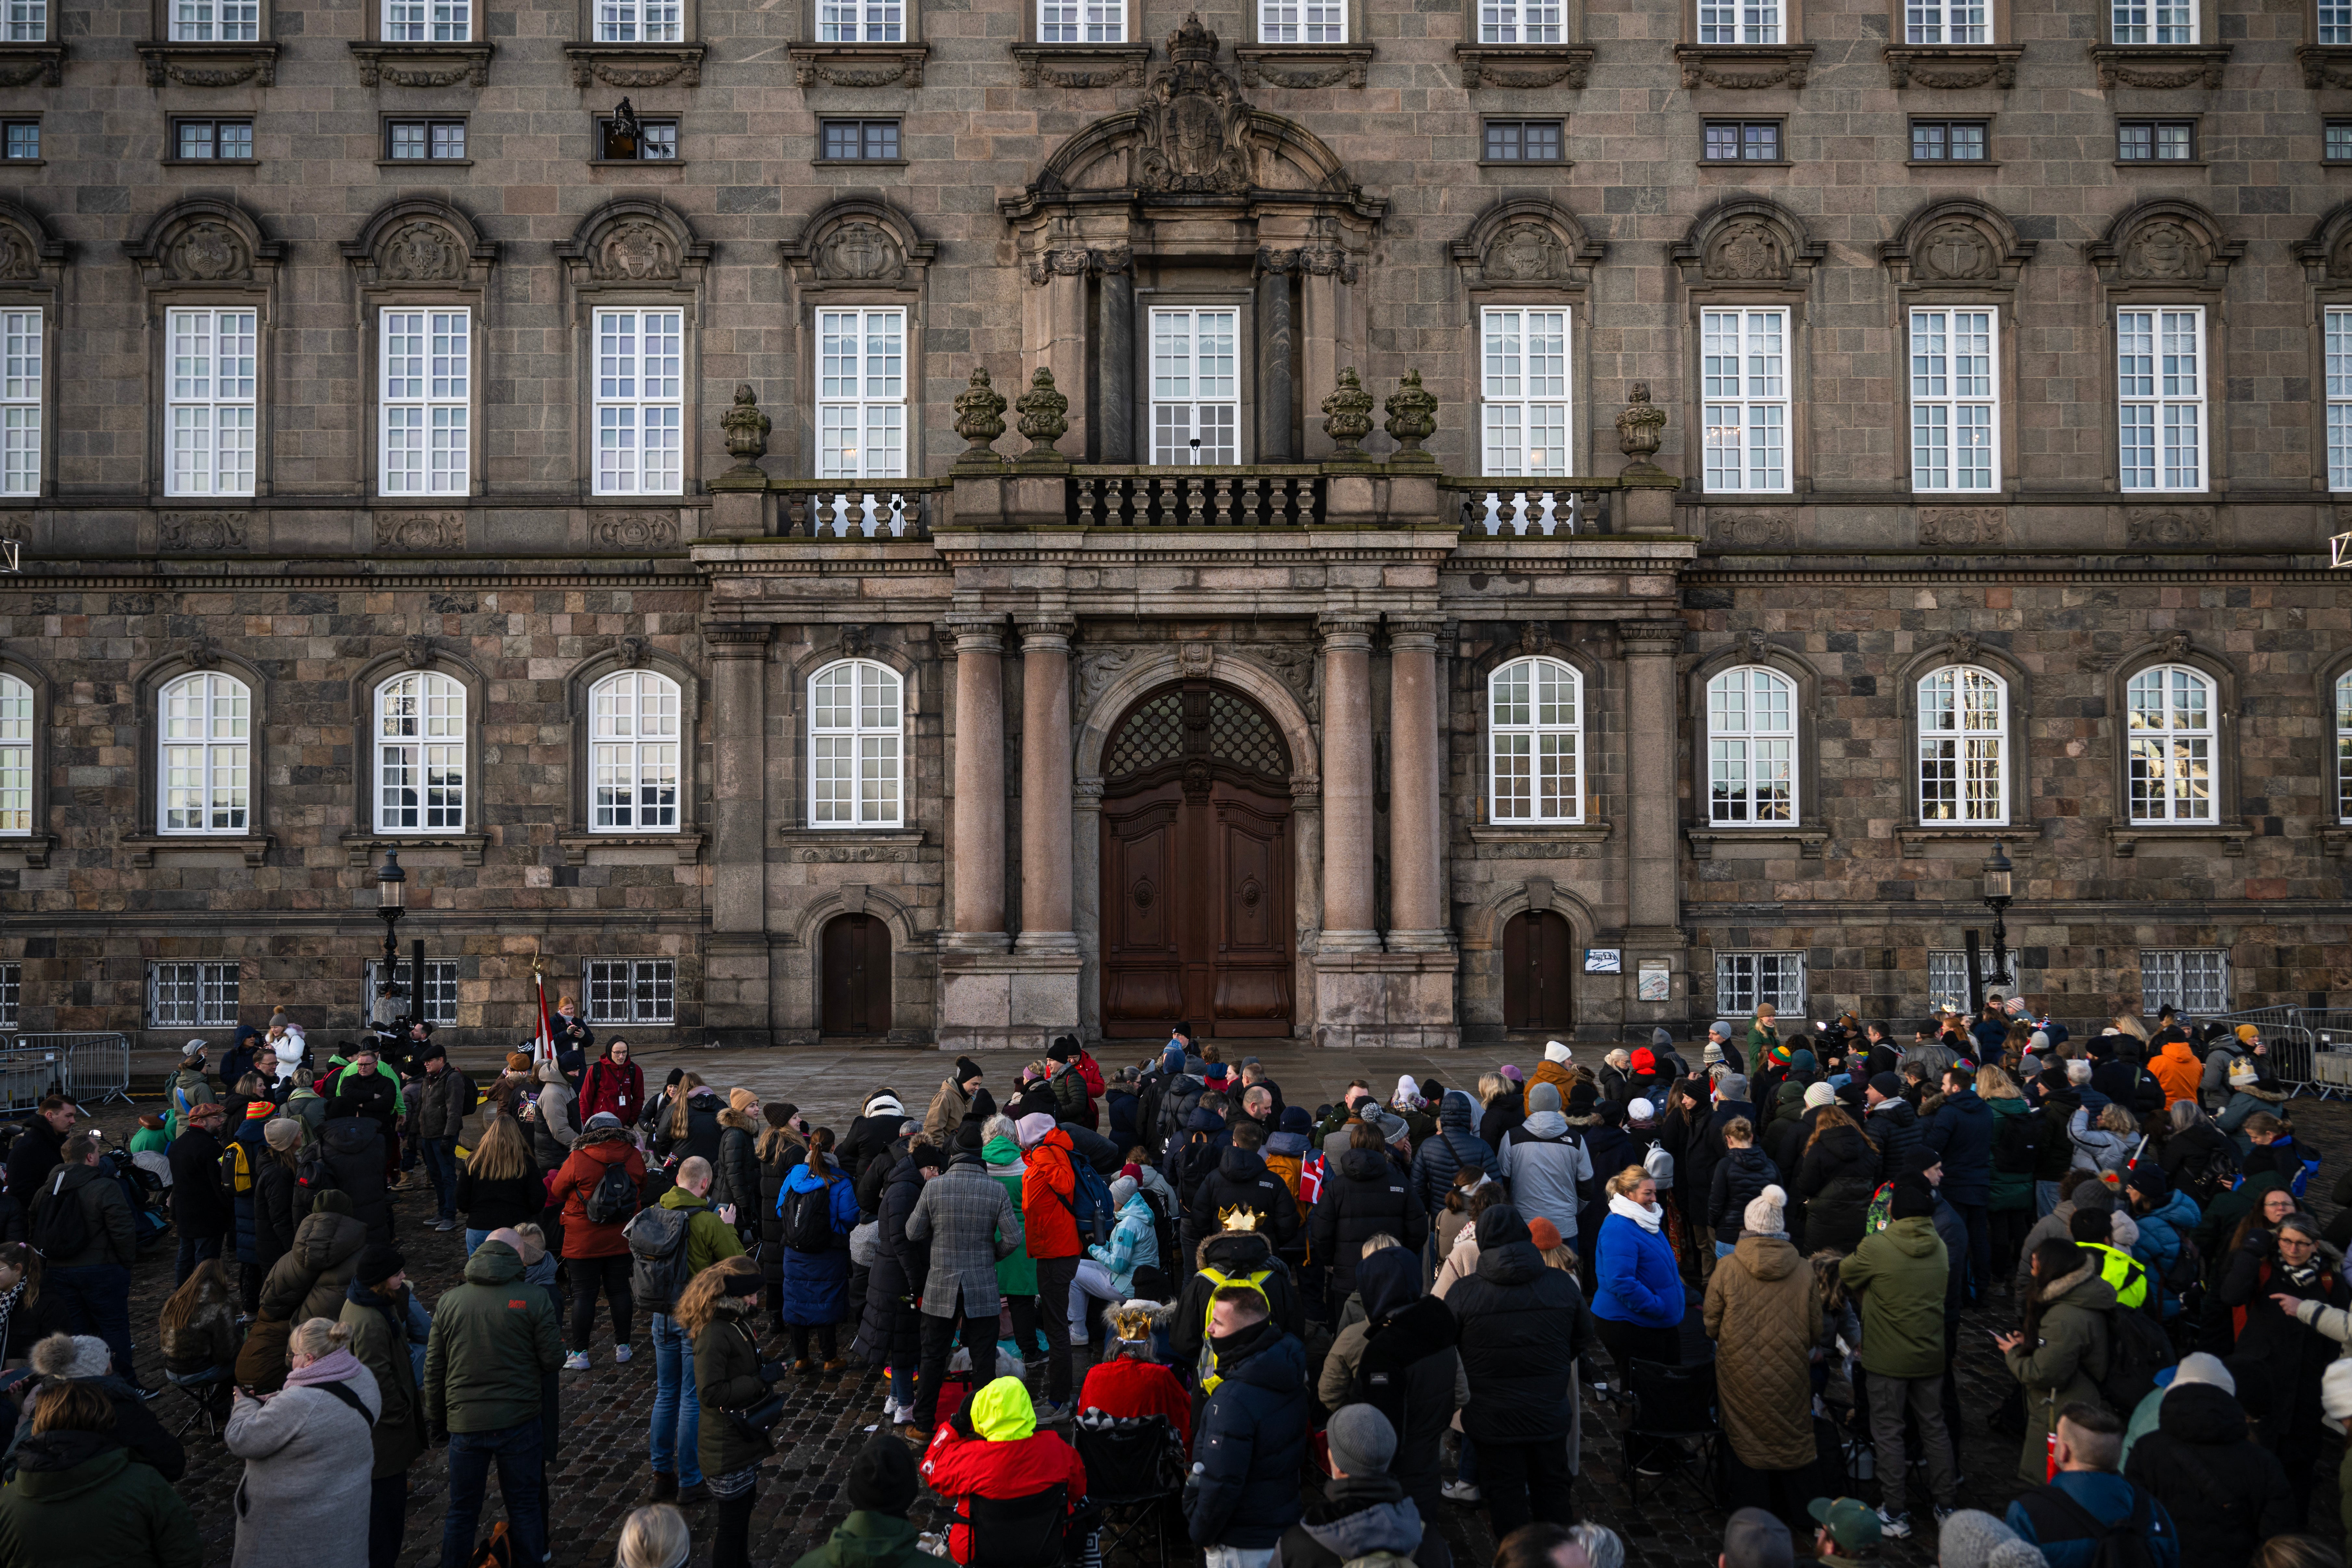 People gather in the early morning at Christiansborg Palace Square ahead of the proclamation of the abdication